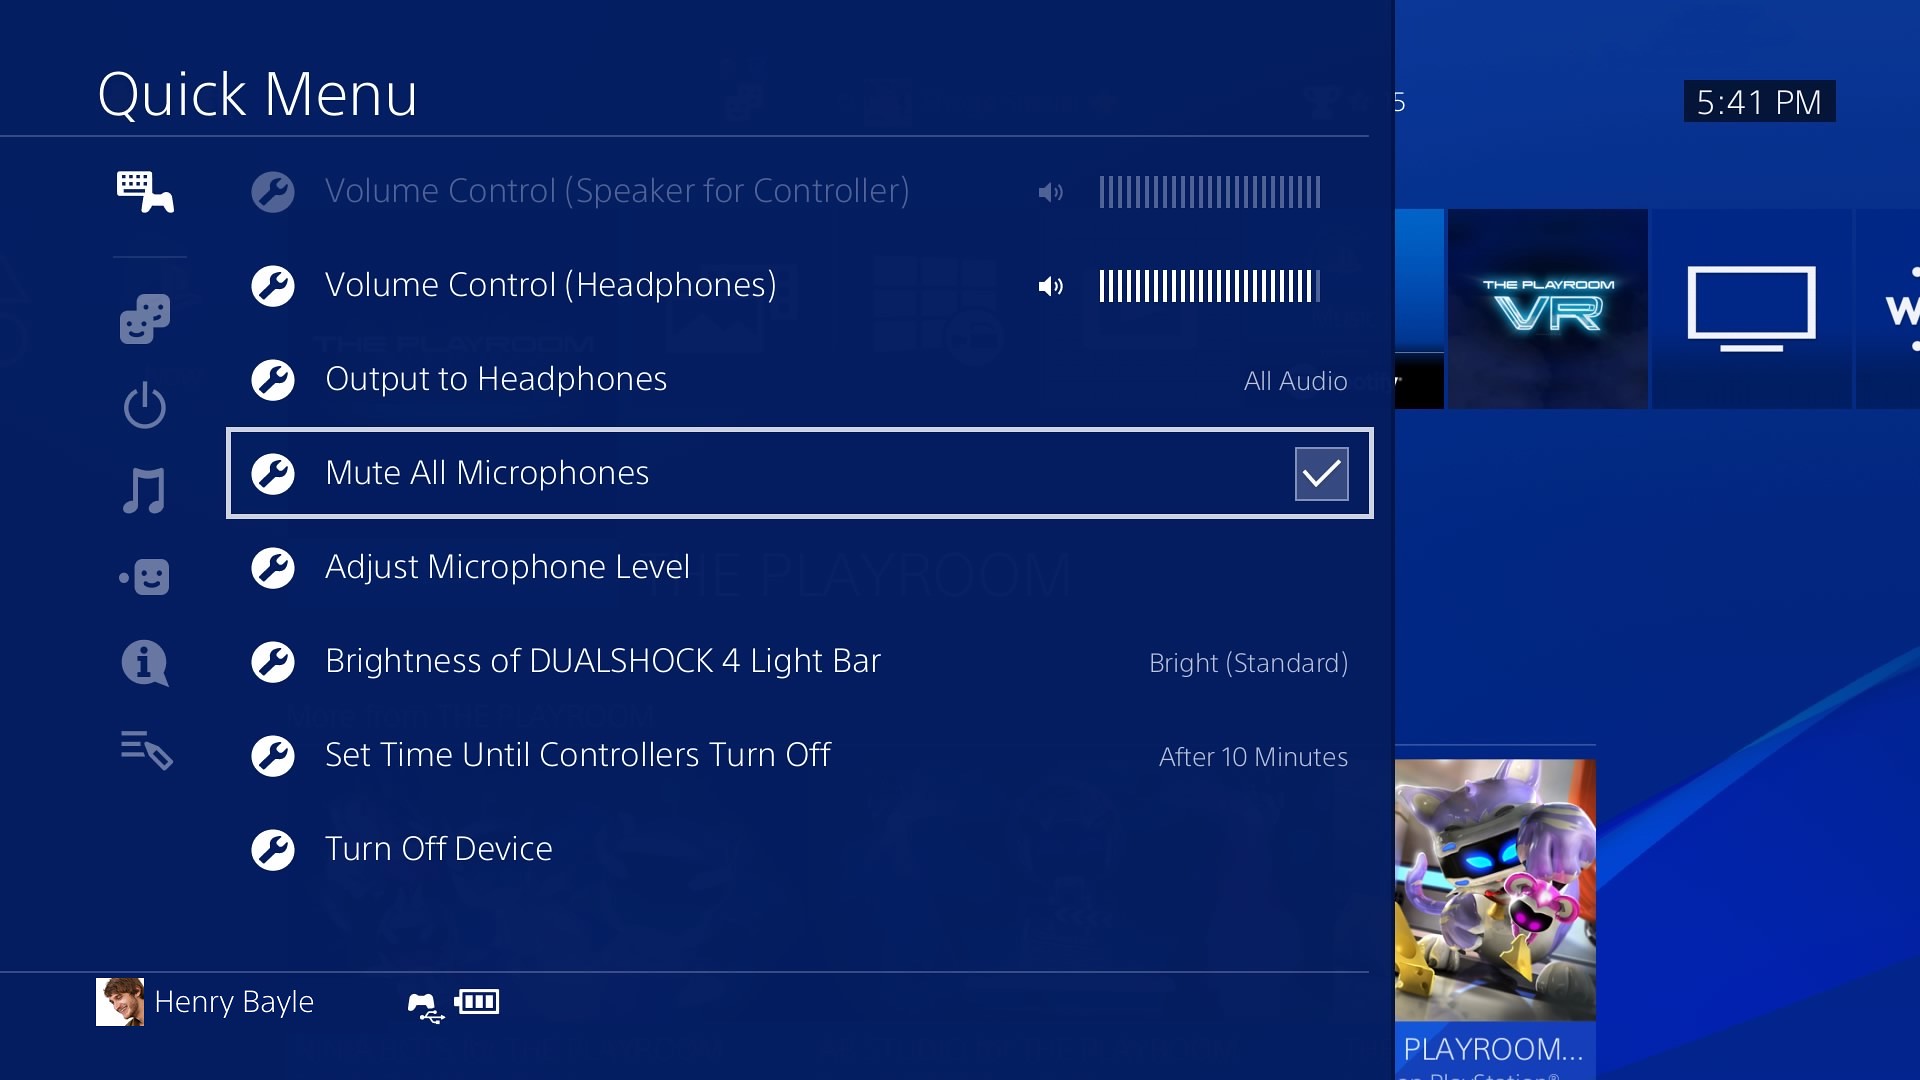 Update the PS4 system software
Use a wired connection